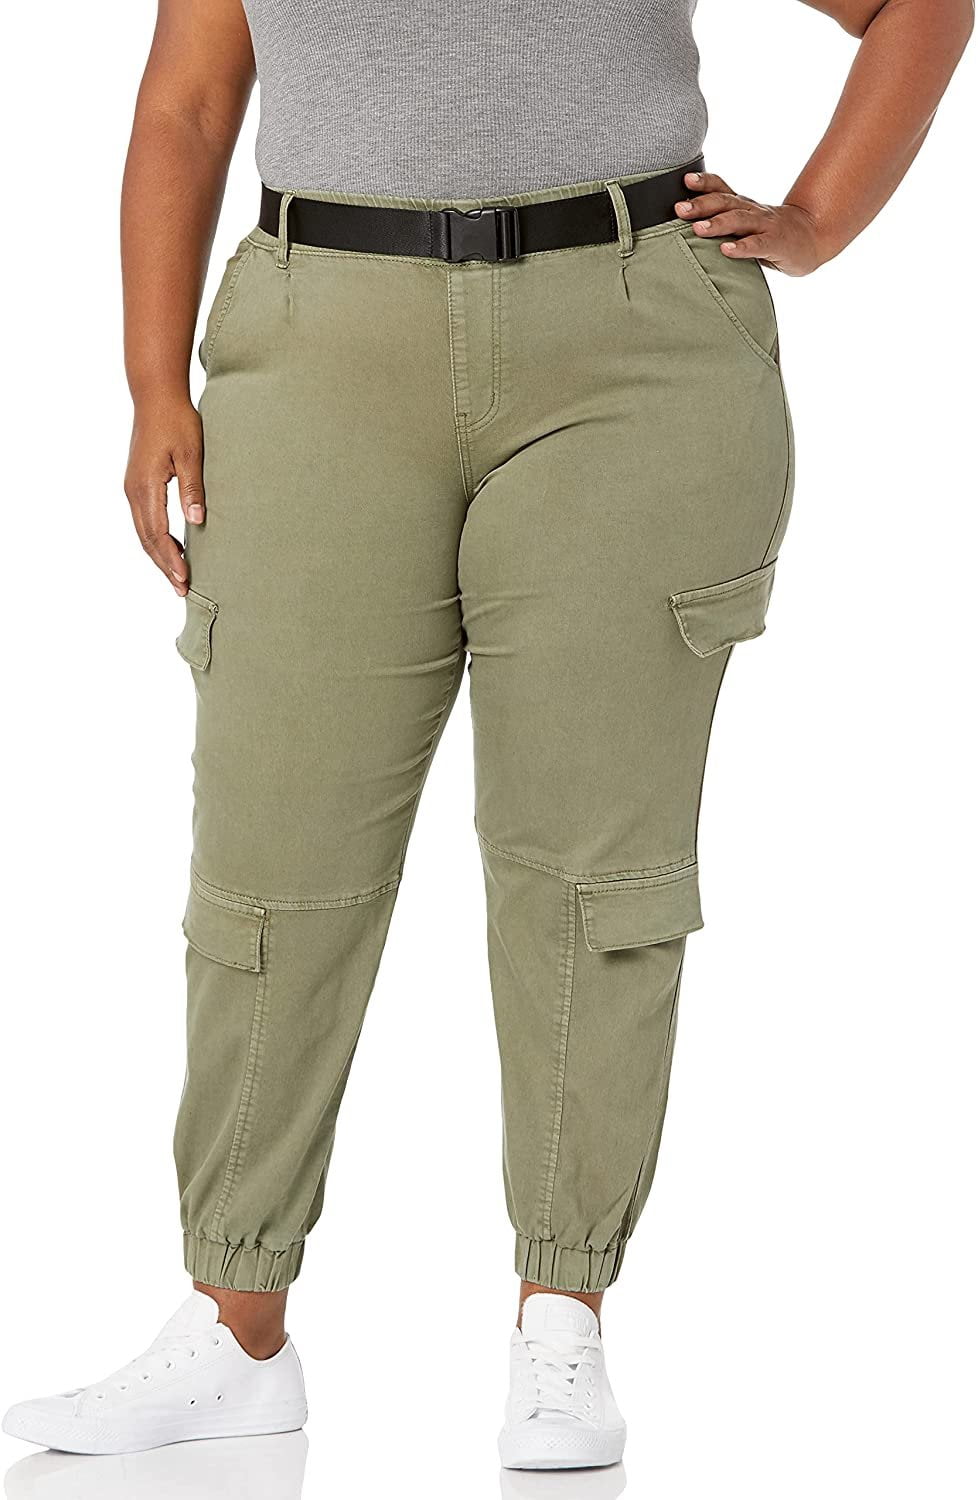 V.I.P. JEANS Cargo Pants for Women Juniors and Plus Sizes Camo